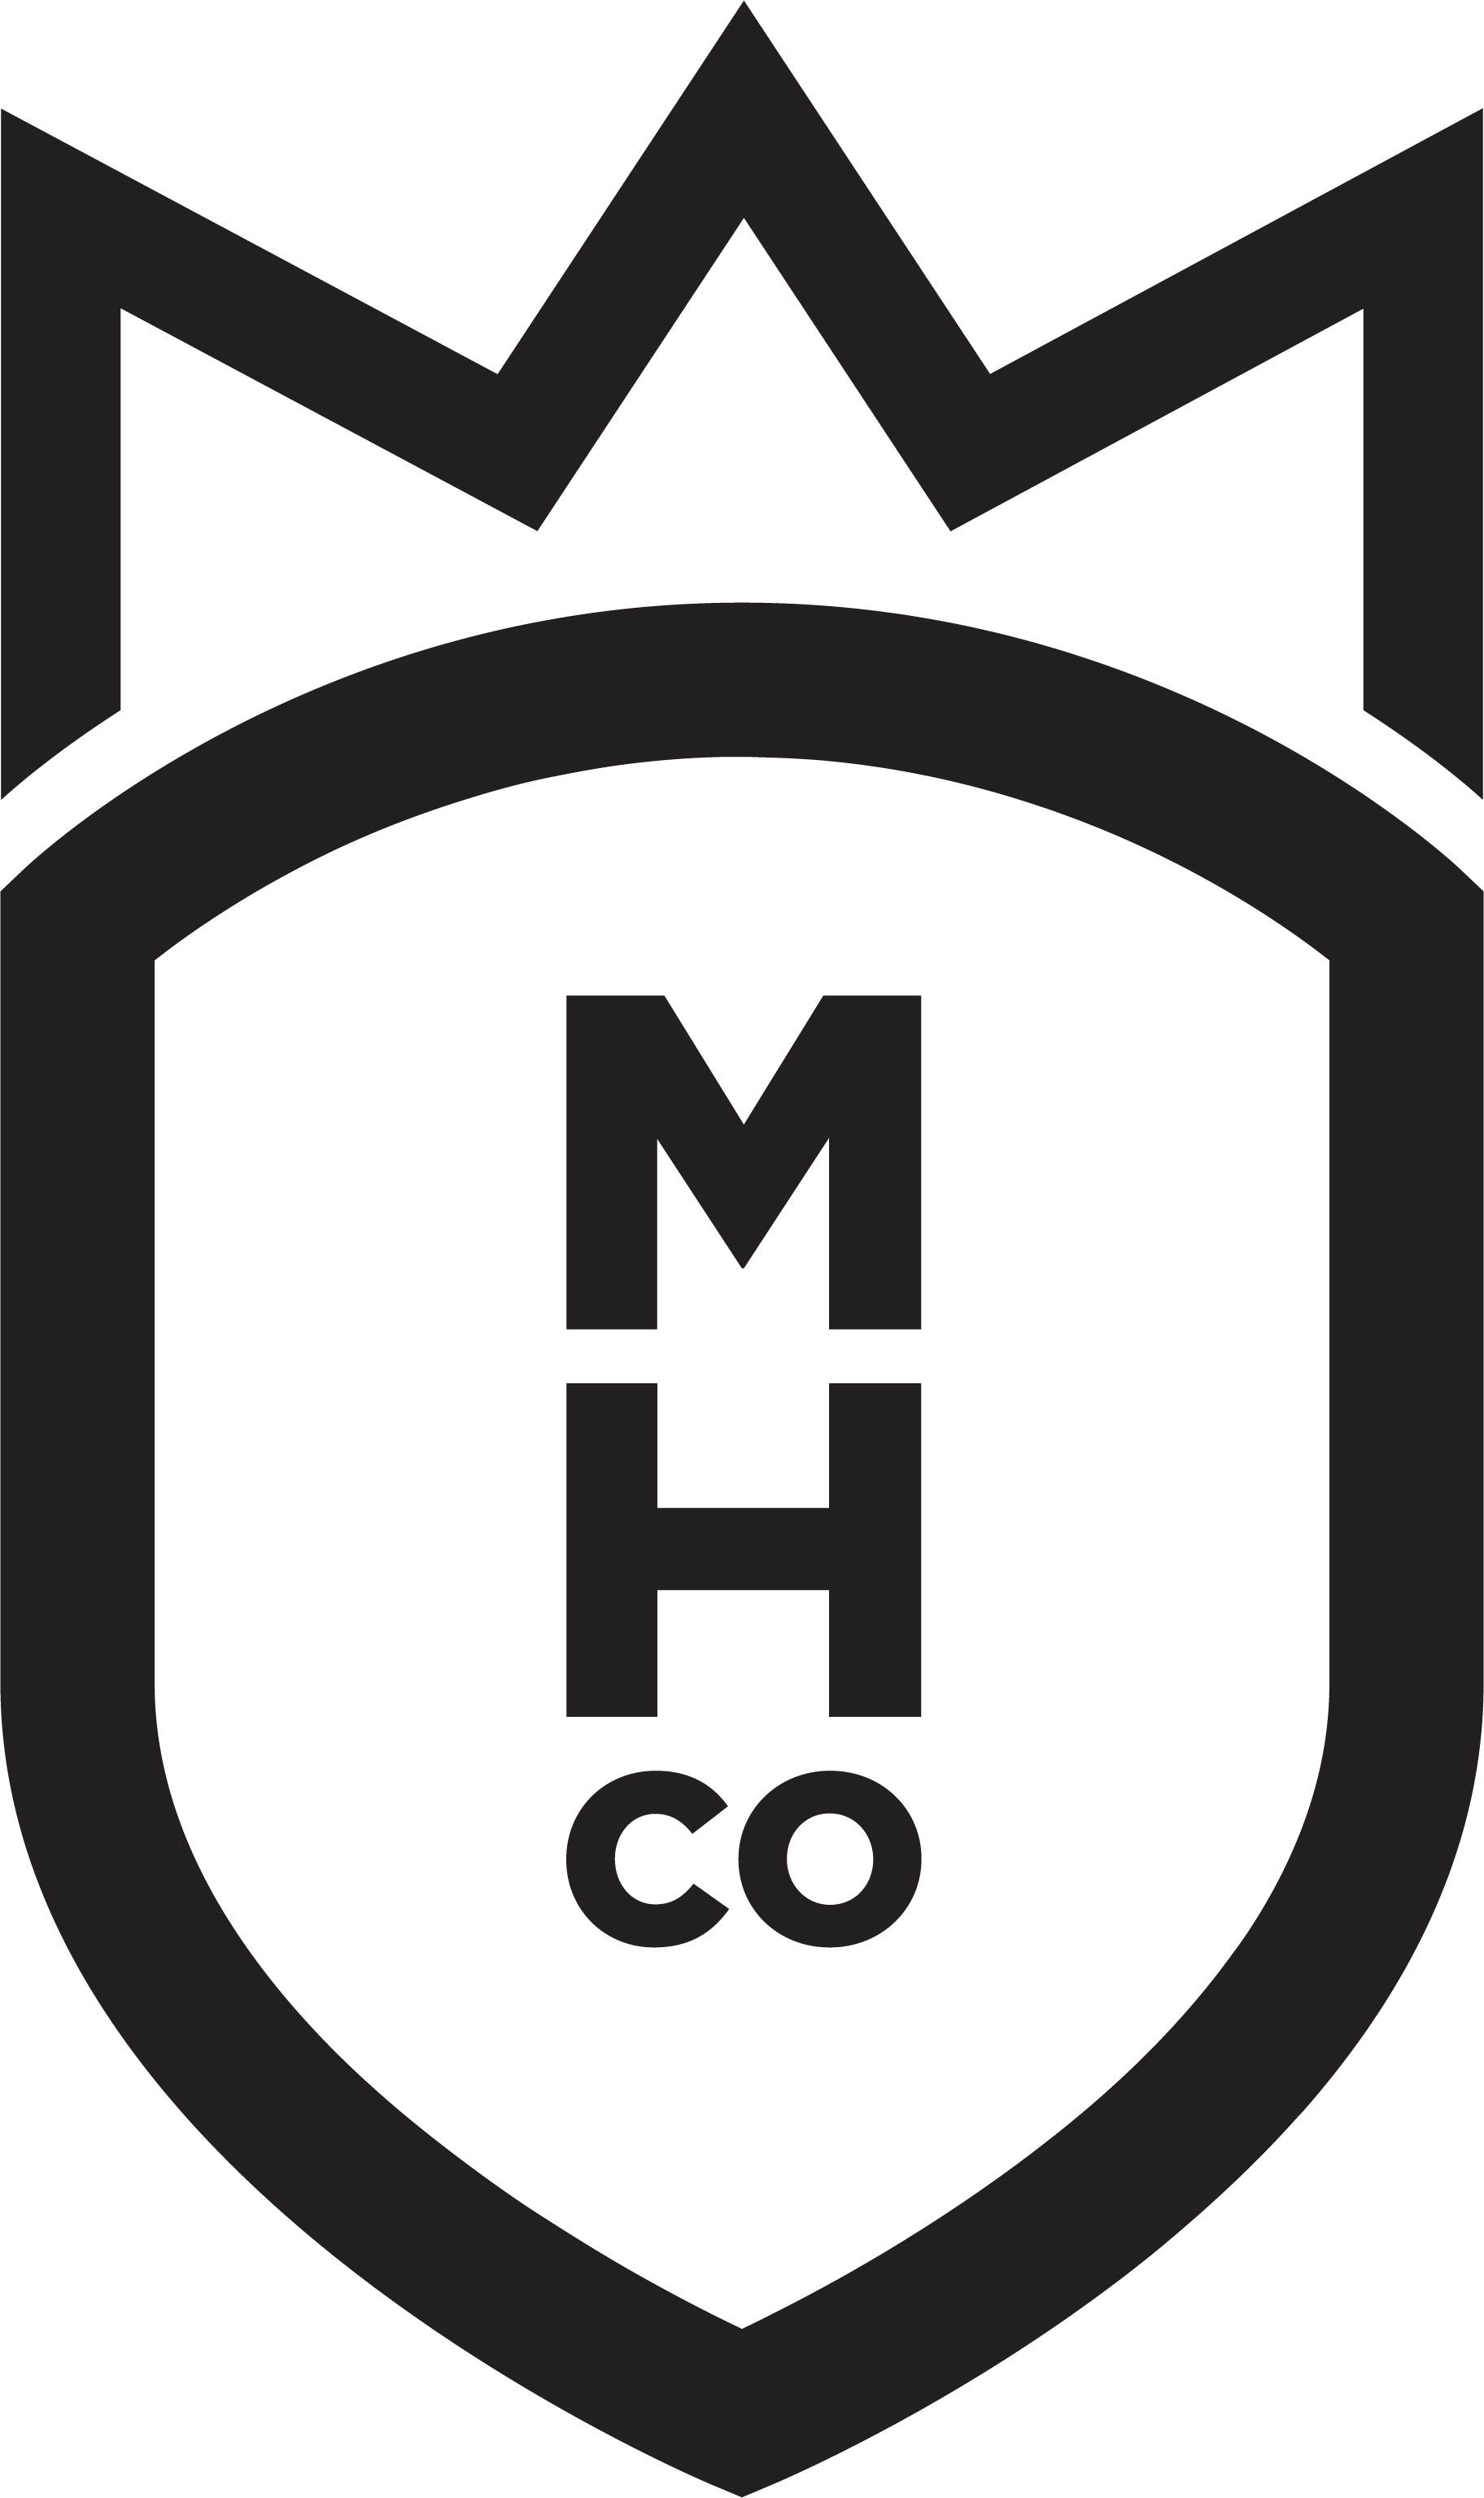 MonarchHairCo logo design by logo designer Rob Wolford for your inspiration and for the worlds largest logo competition